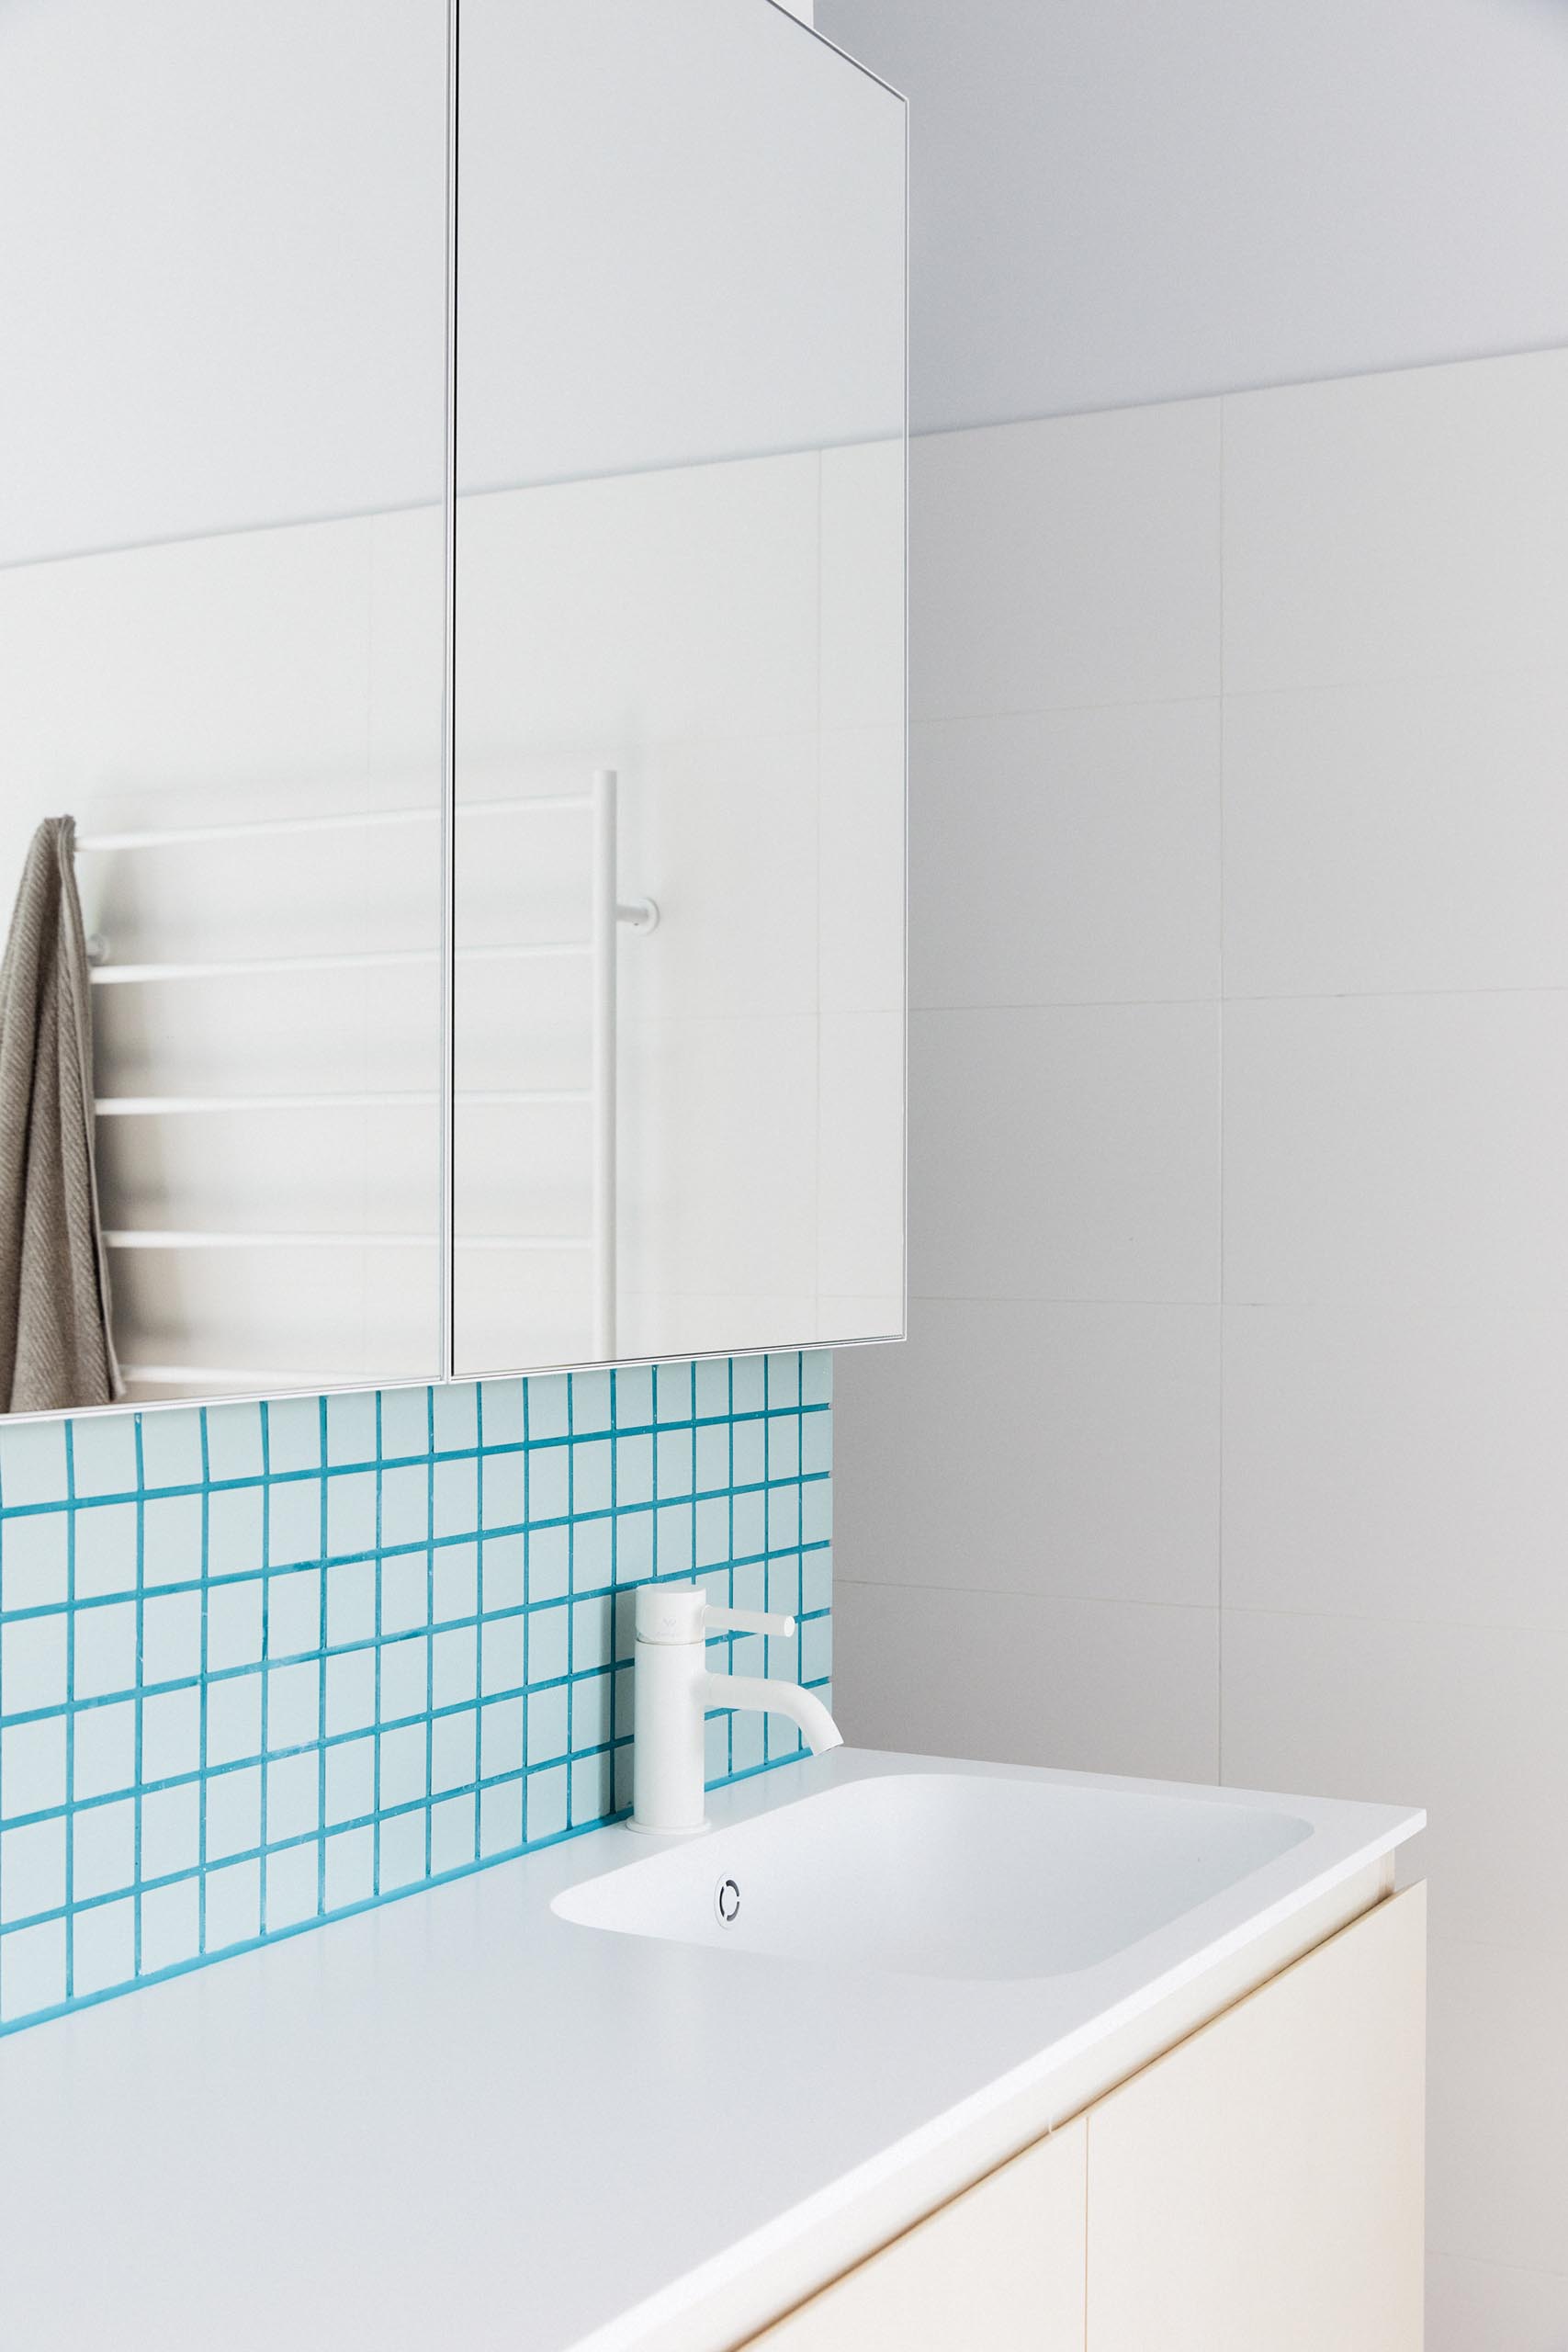 In this modern bathroom, white walls have been paired with soft blue/green tiles and matching grout for a contemporary look.